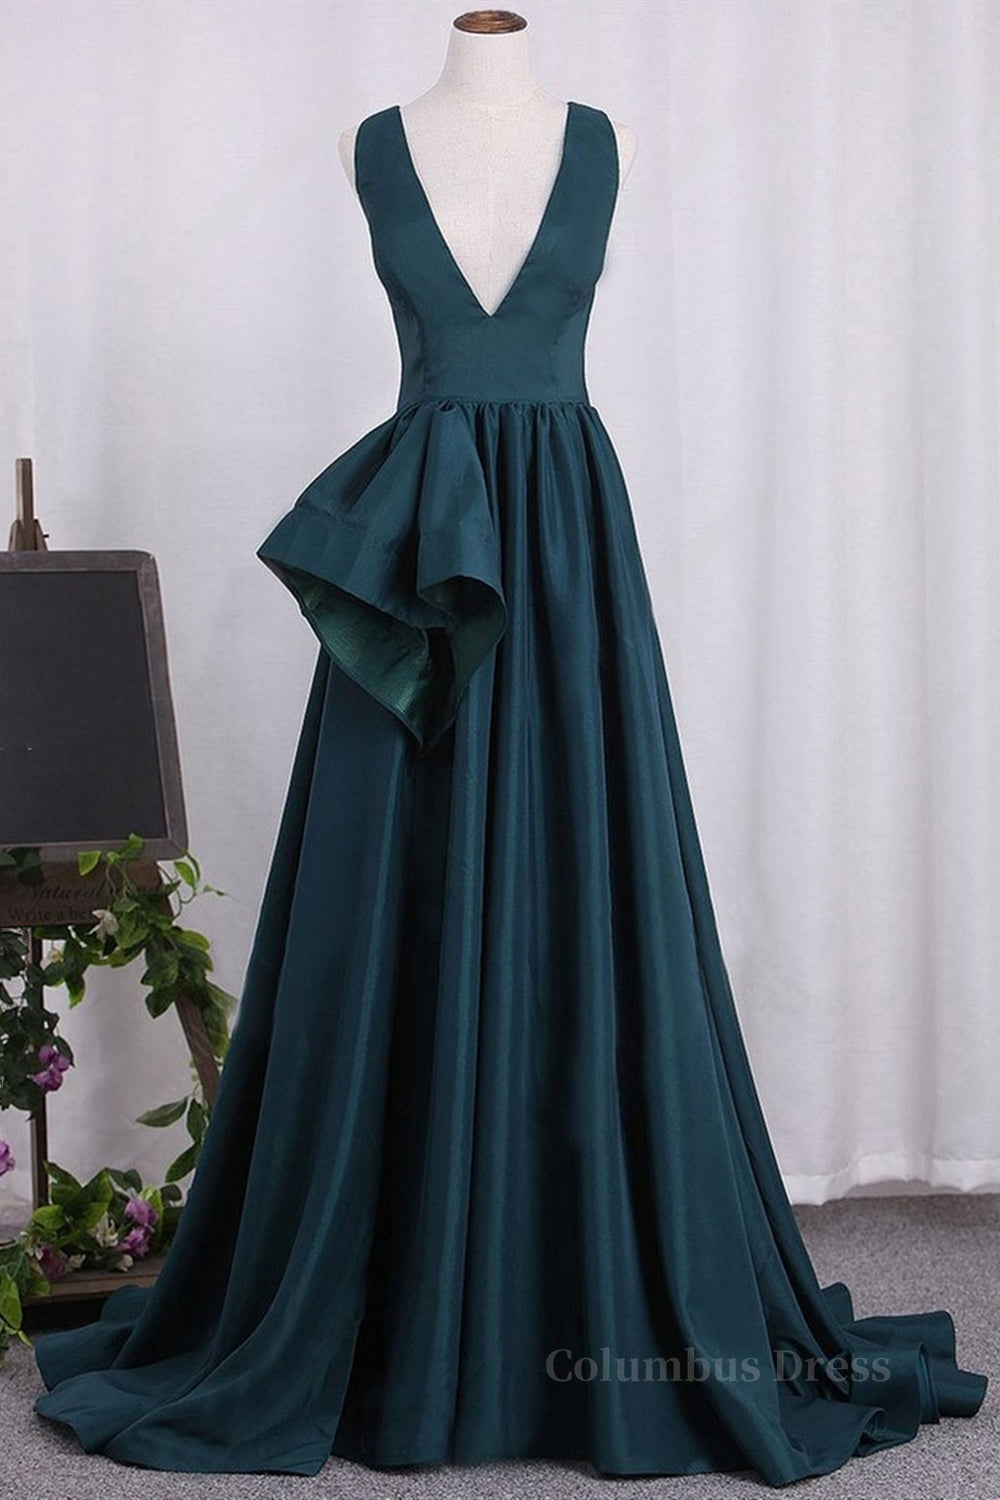 A Line V Neck V Back Green Satin Long Corset Prom Dresses, Long Green Corset Formal Evening Dresses outfit, Homecoming